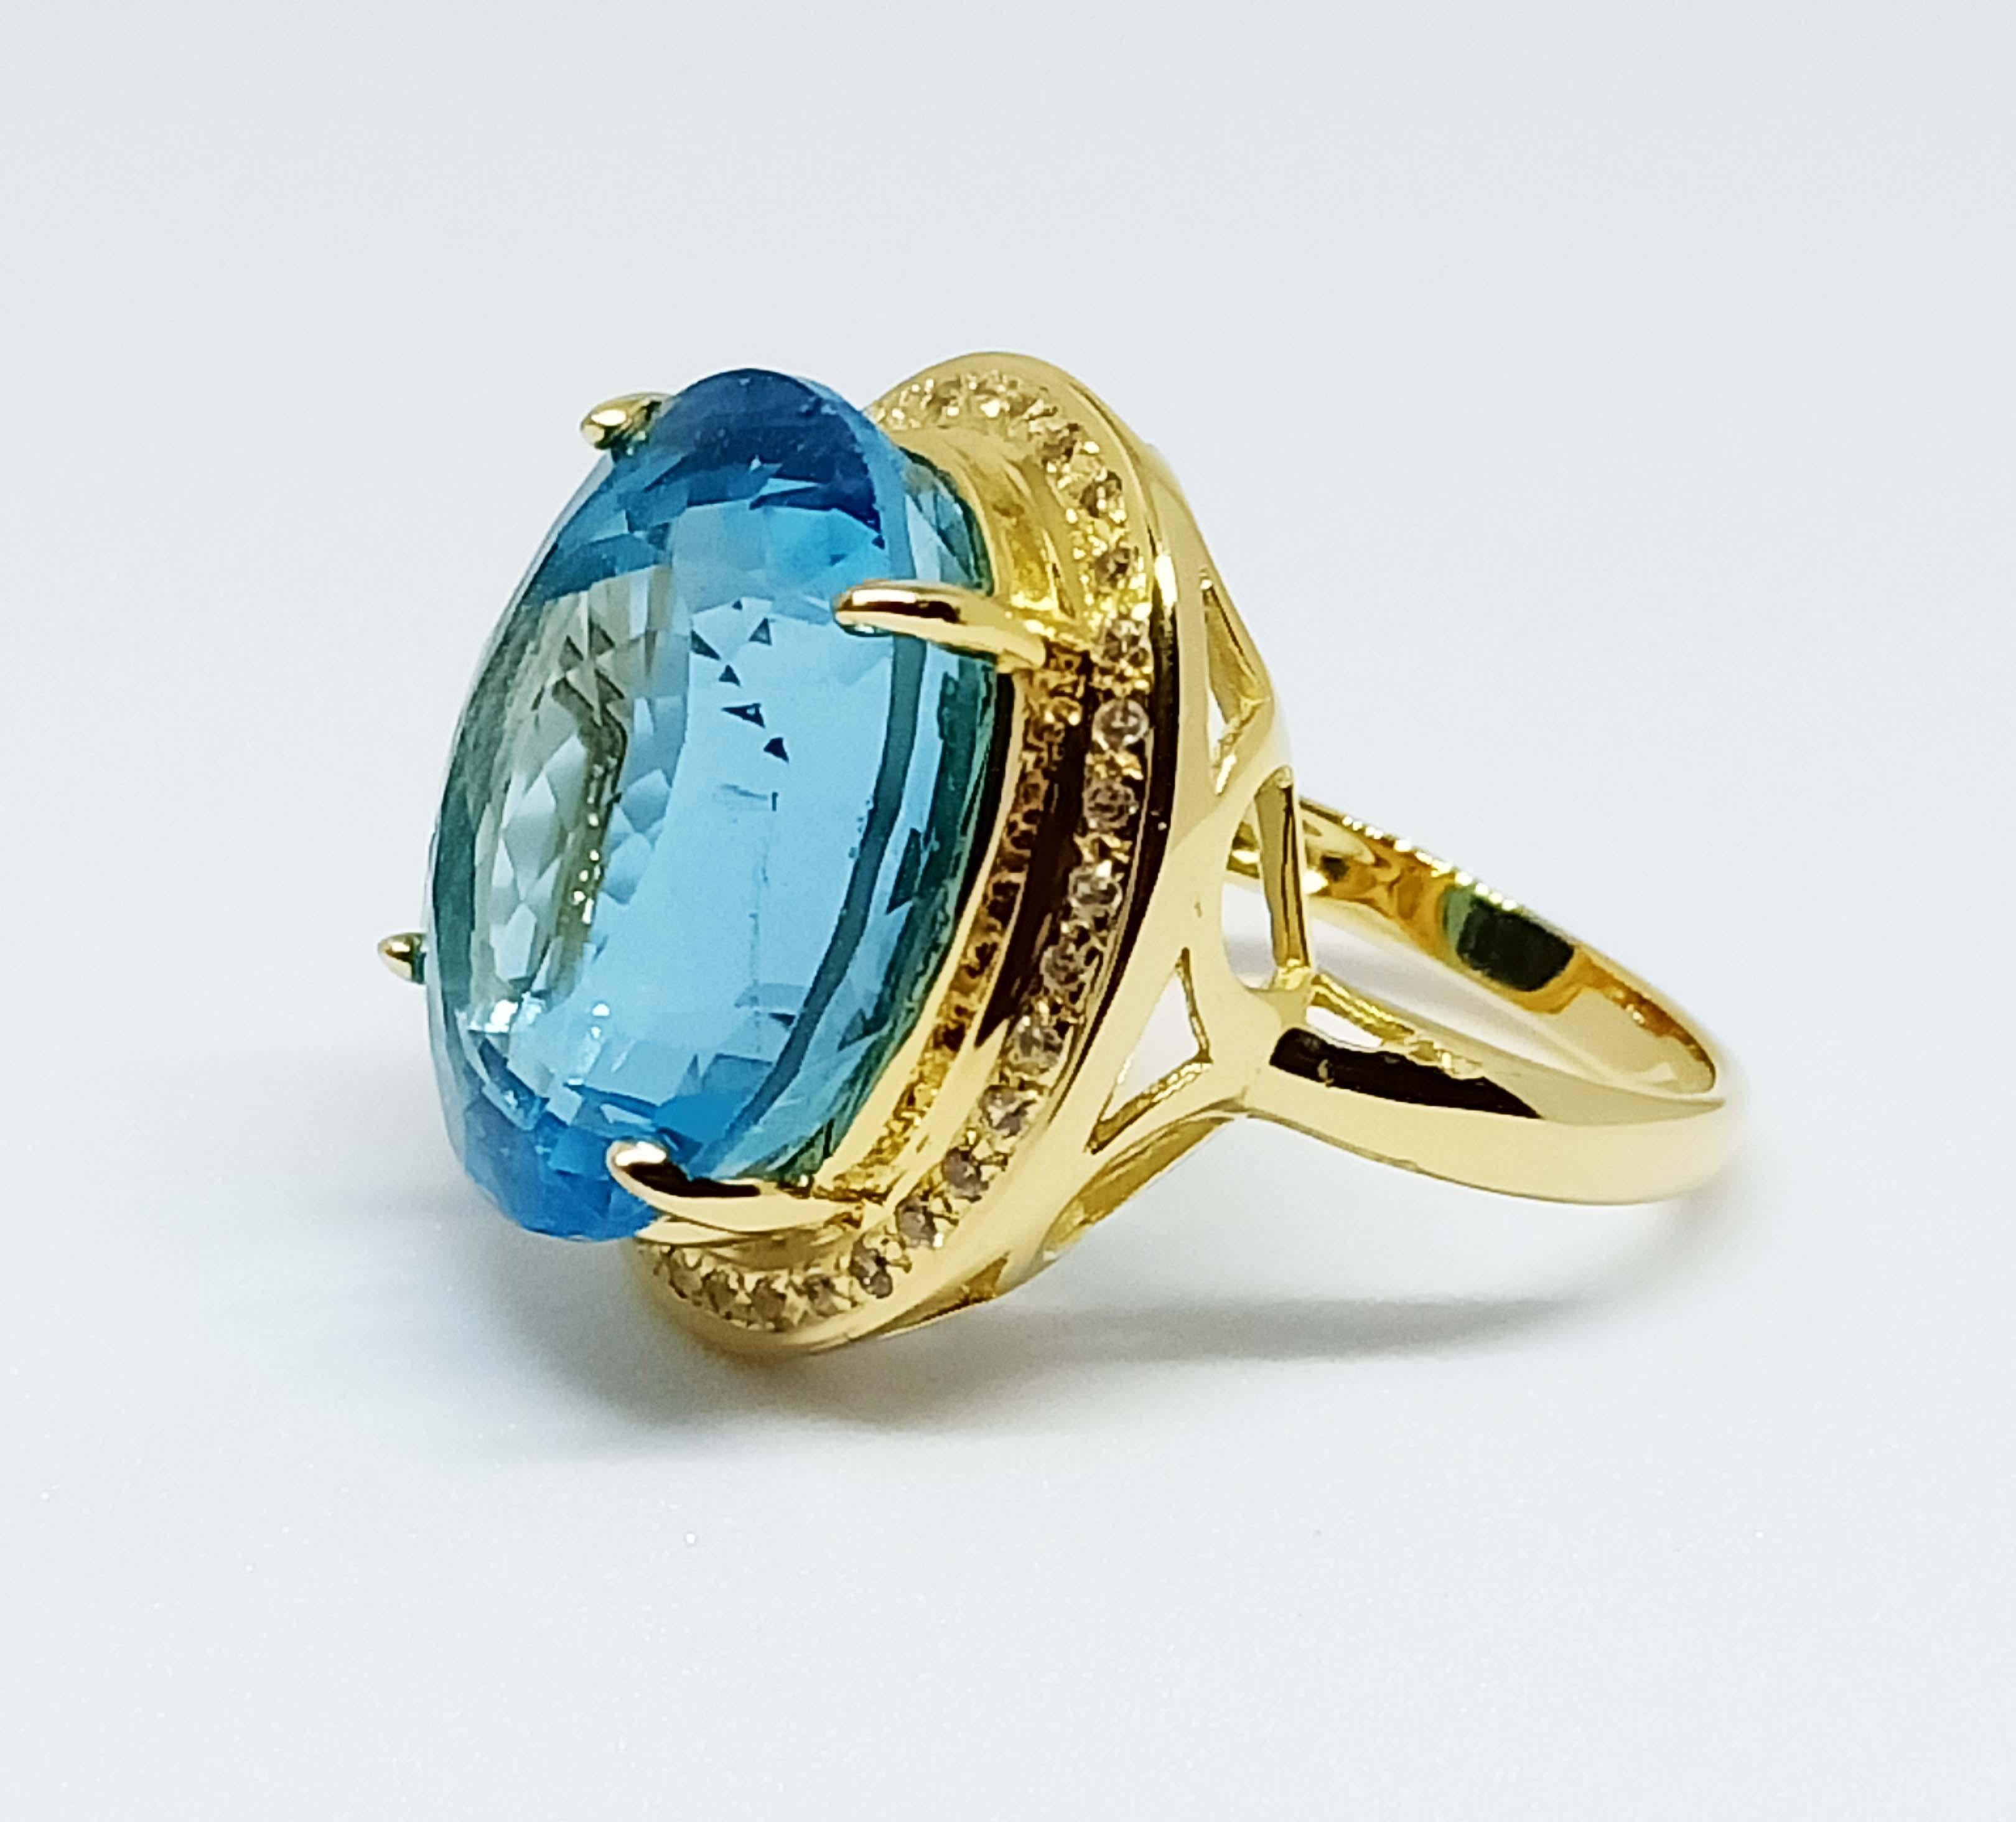 Modern 25.19 cts Swiss BlueTopaz Sterling Silver In 18K Gold Plated For Sale